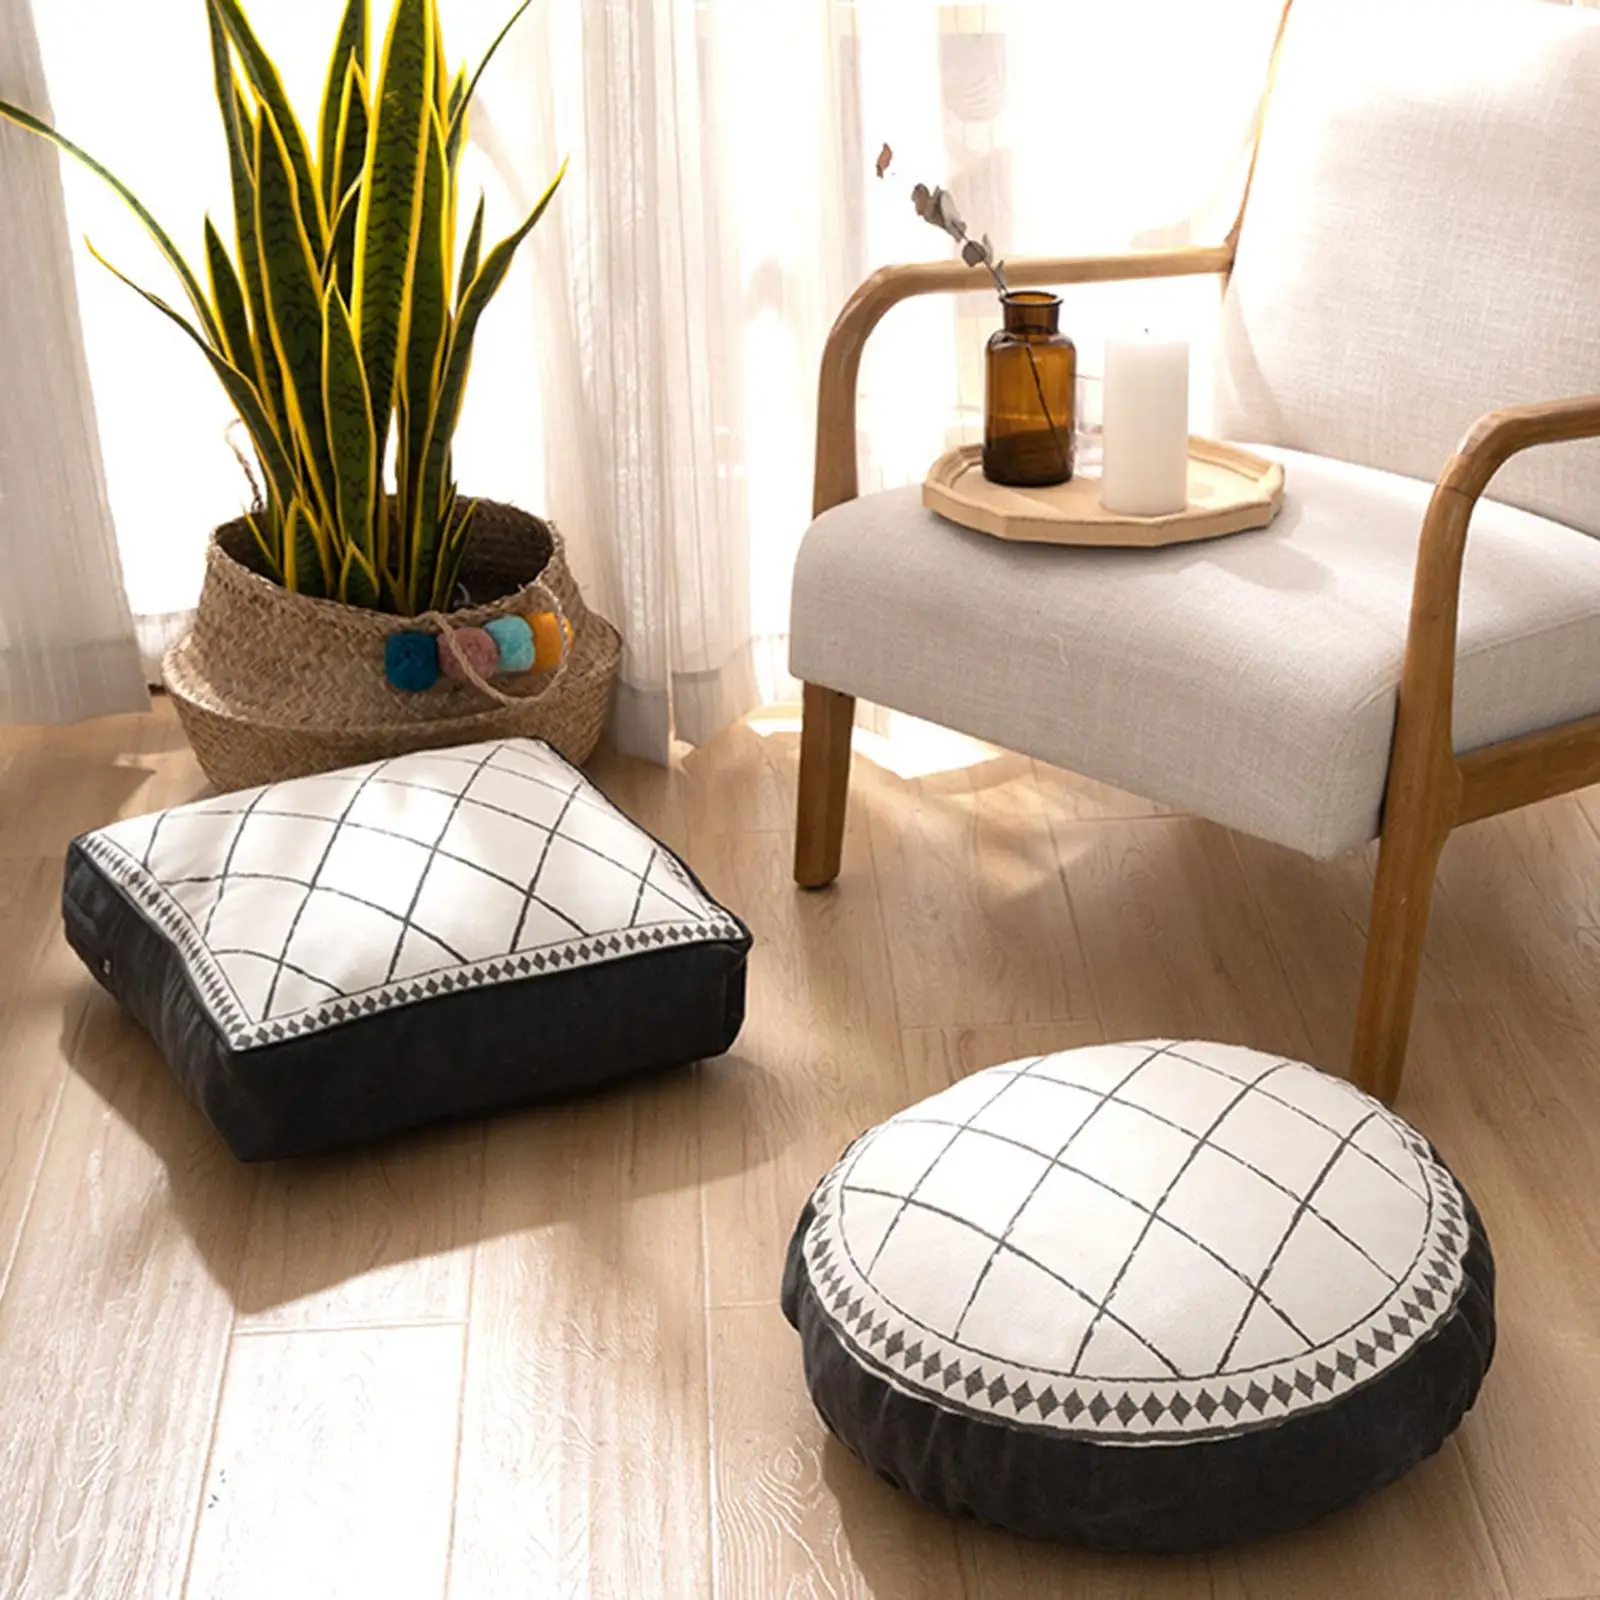 Large Pouf Cover Living Room Decoration Ottomans Footstools Textured Unstuffed Ottoman Pouffe Cover Patio Seat Cover Foot Stool